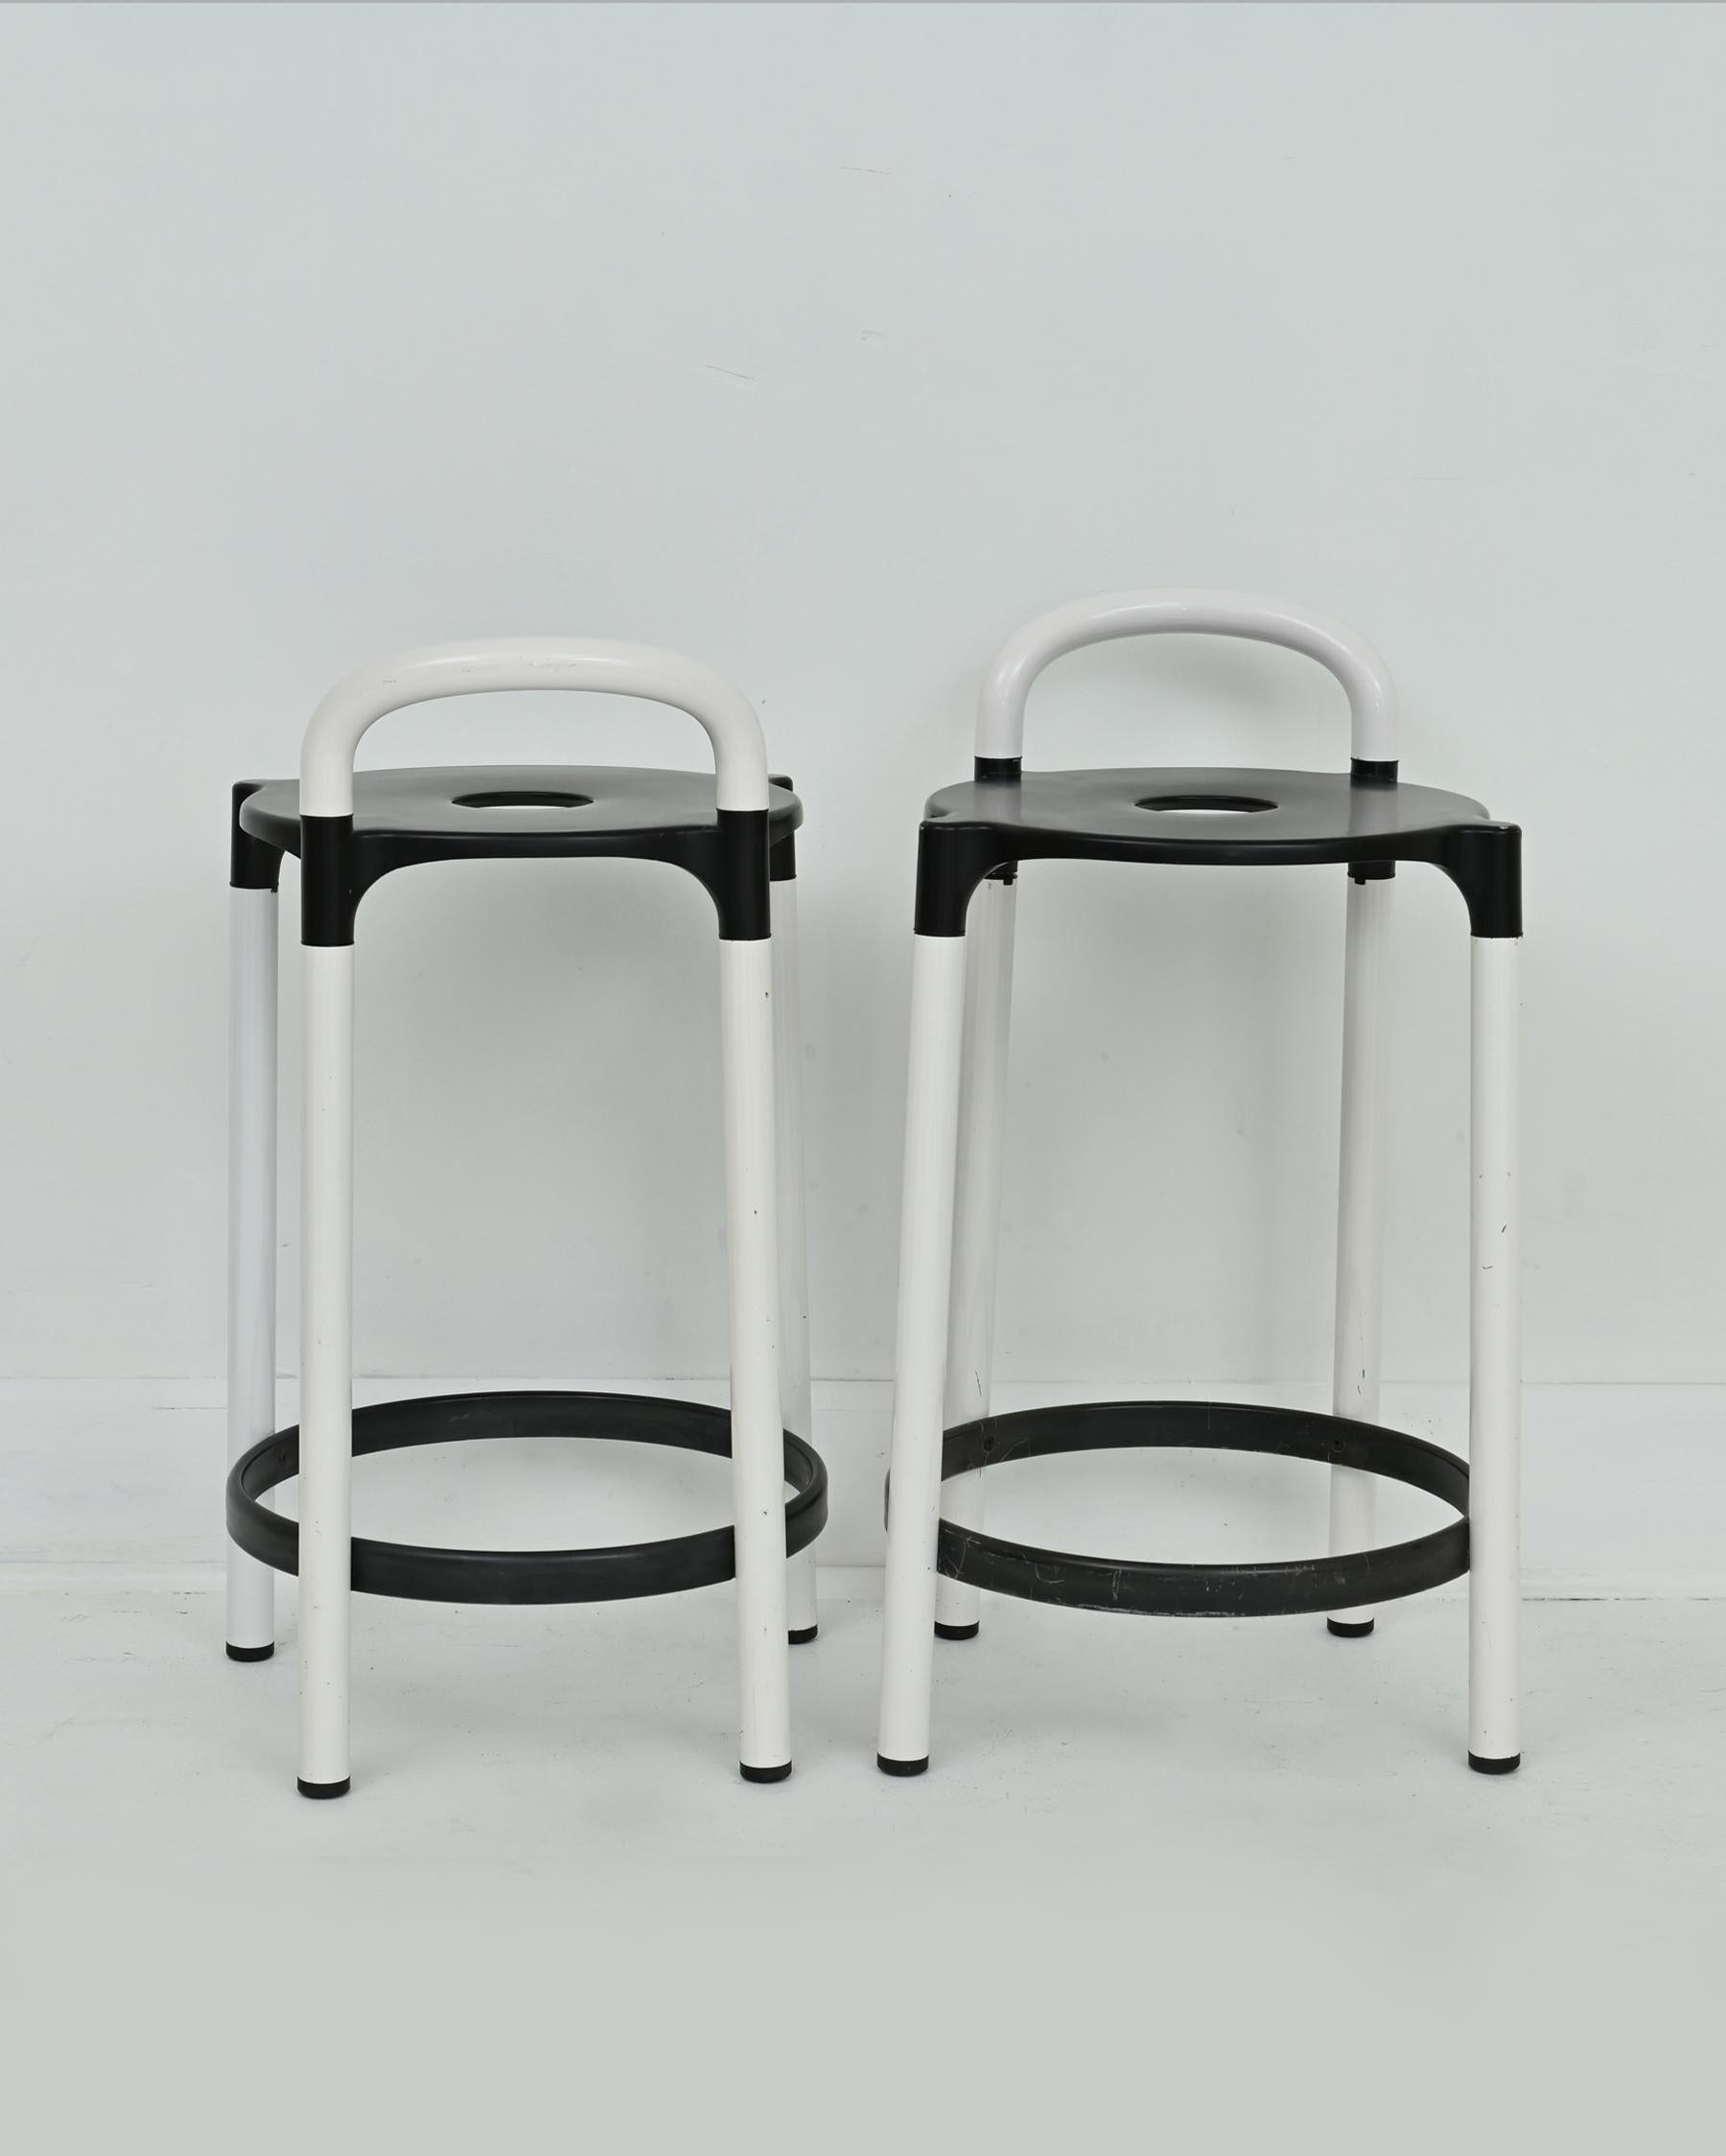 Molded 1980s Pair of Black and White Polo Stools by Anna Castelli Ferrieri for Kartell For Sale